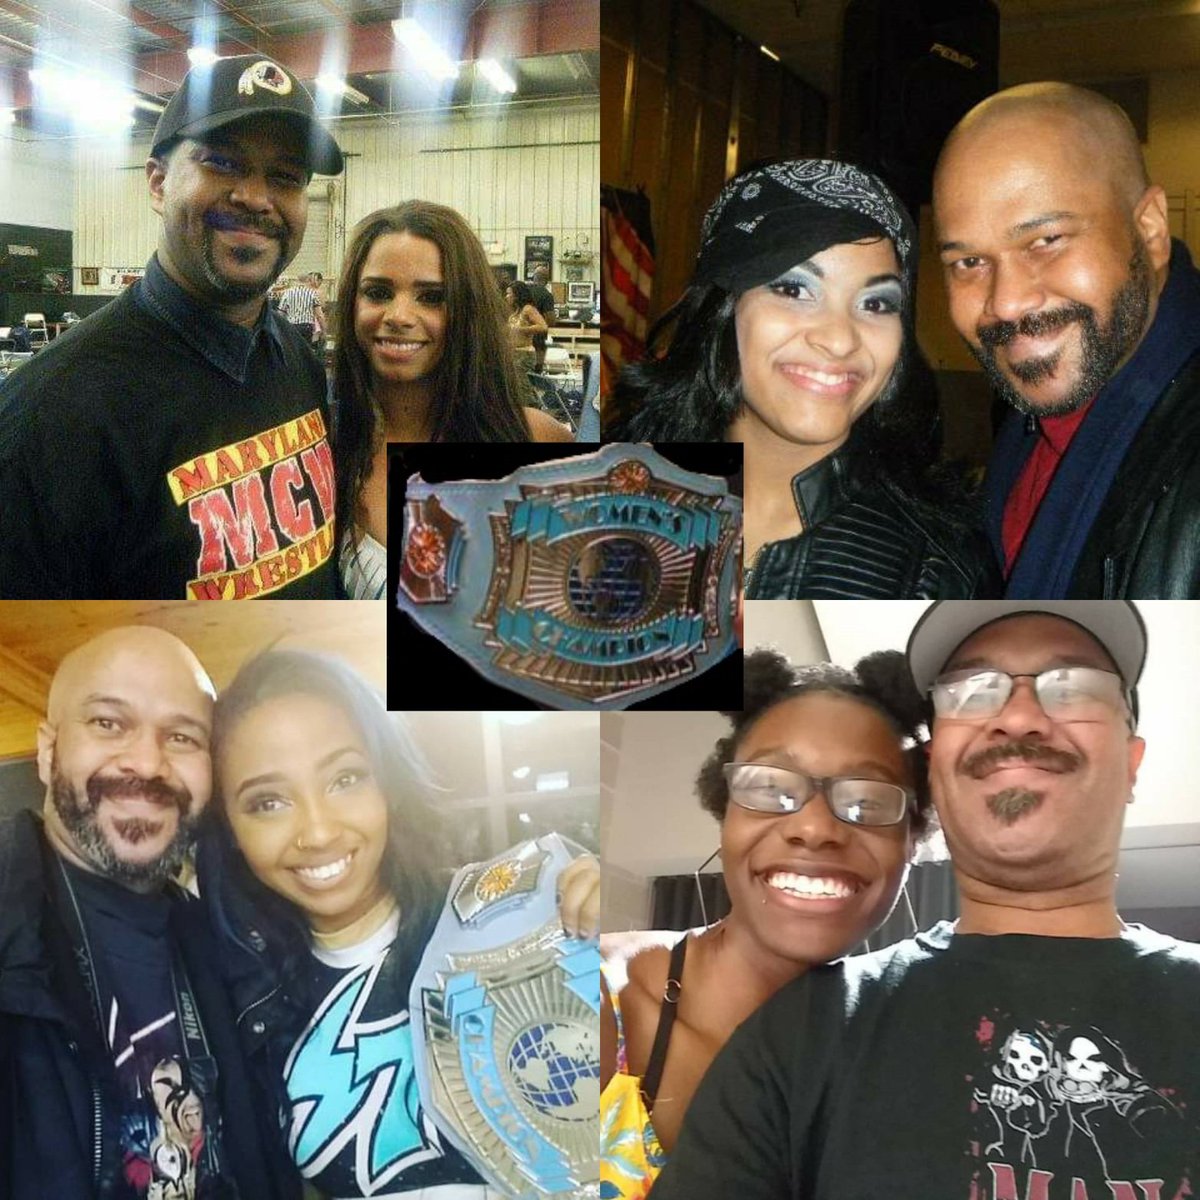 Black History continues. The @MCWWrestling women's title (once held by Mickie James & Melina) has been worn by these 4 Black beauties. The very 1st champ @1ReneeMichelle, The Renegade Queen #AmberRodriguez, The Egyptian Queen @Sahara_007, & the   current champ @TheGiaScott #EOS